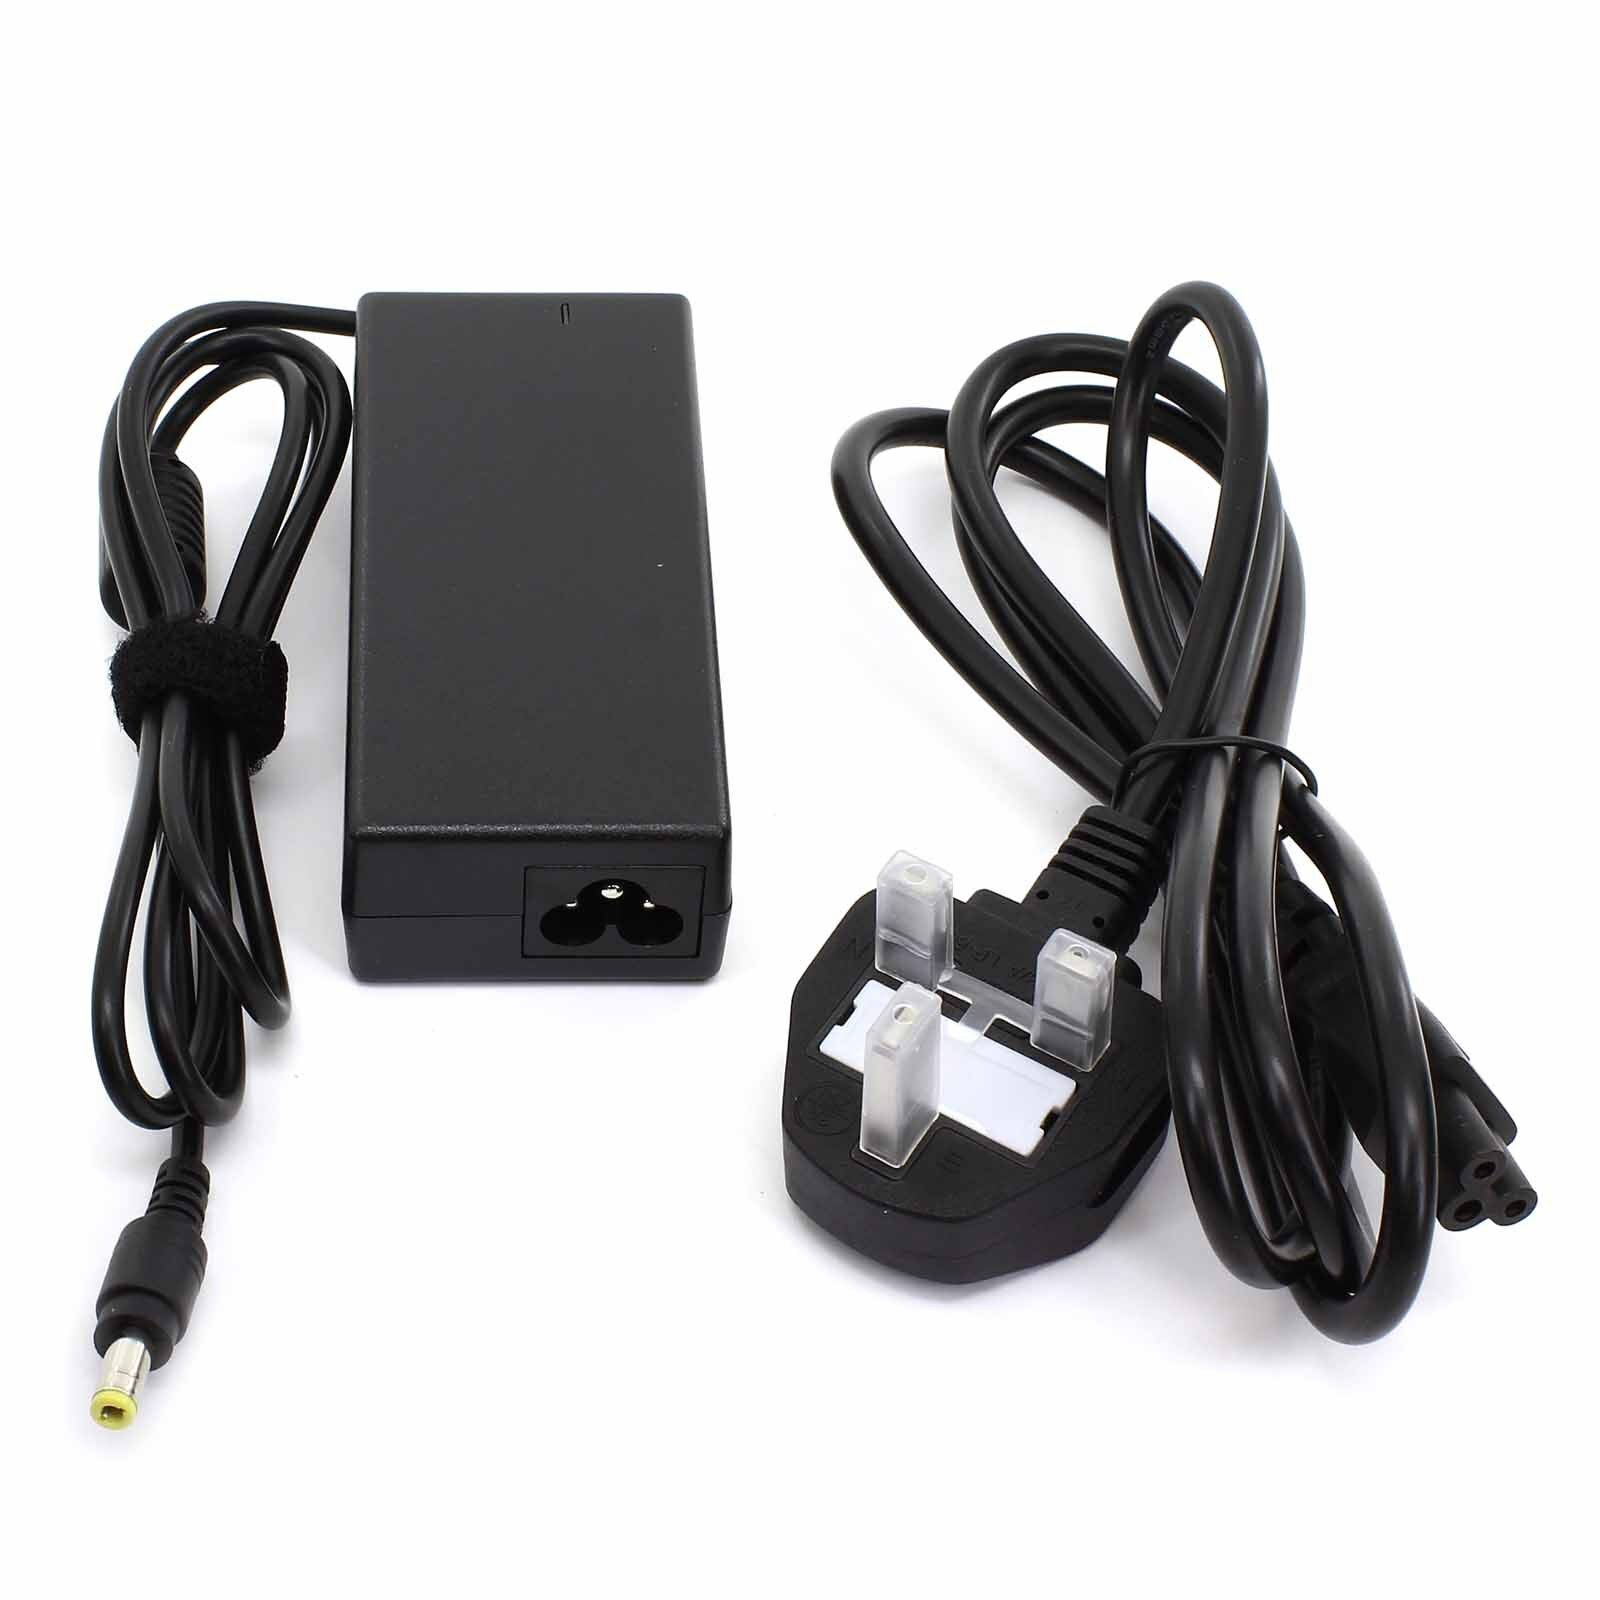 6.0V 1.0A AC Power Adapter for Bush All Weather Rechargeable DAB Radio NE-2151 To